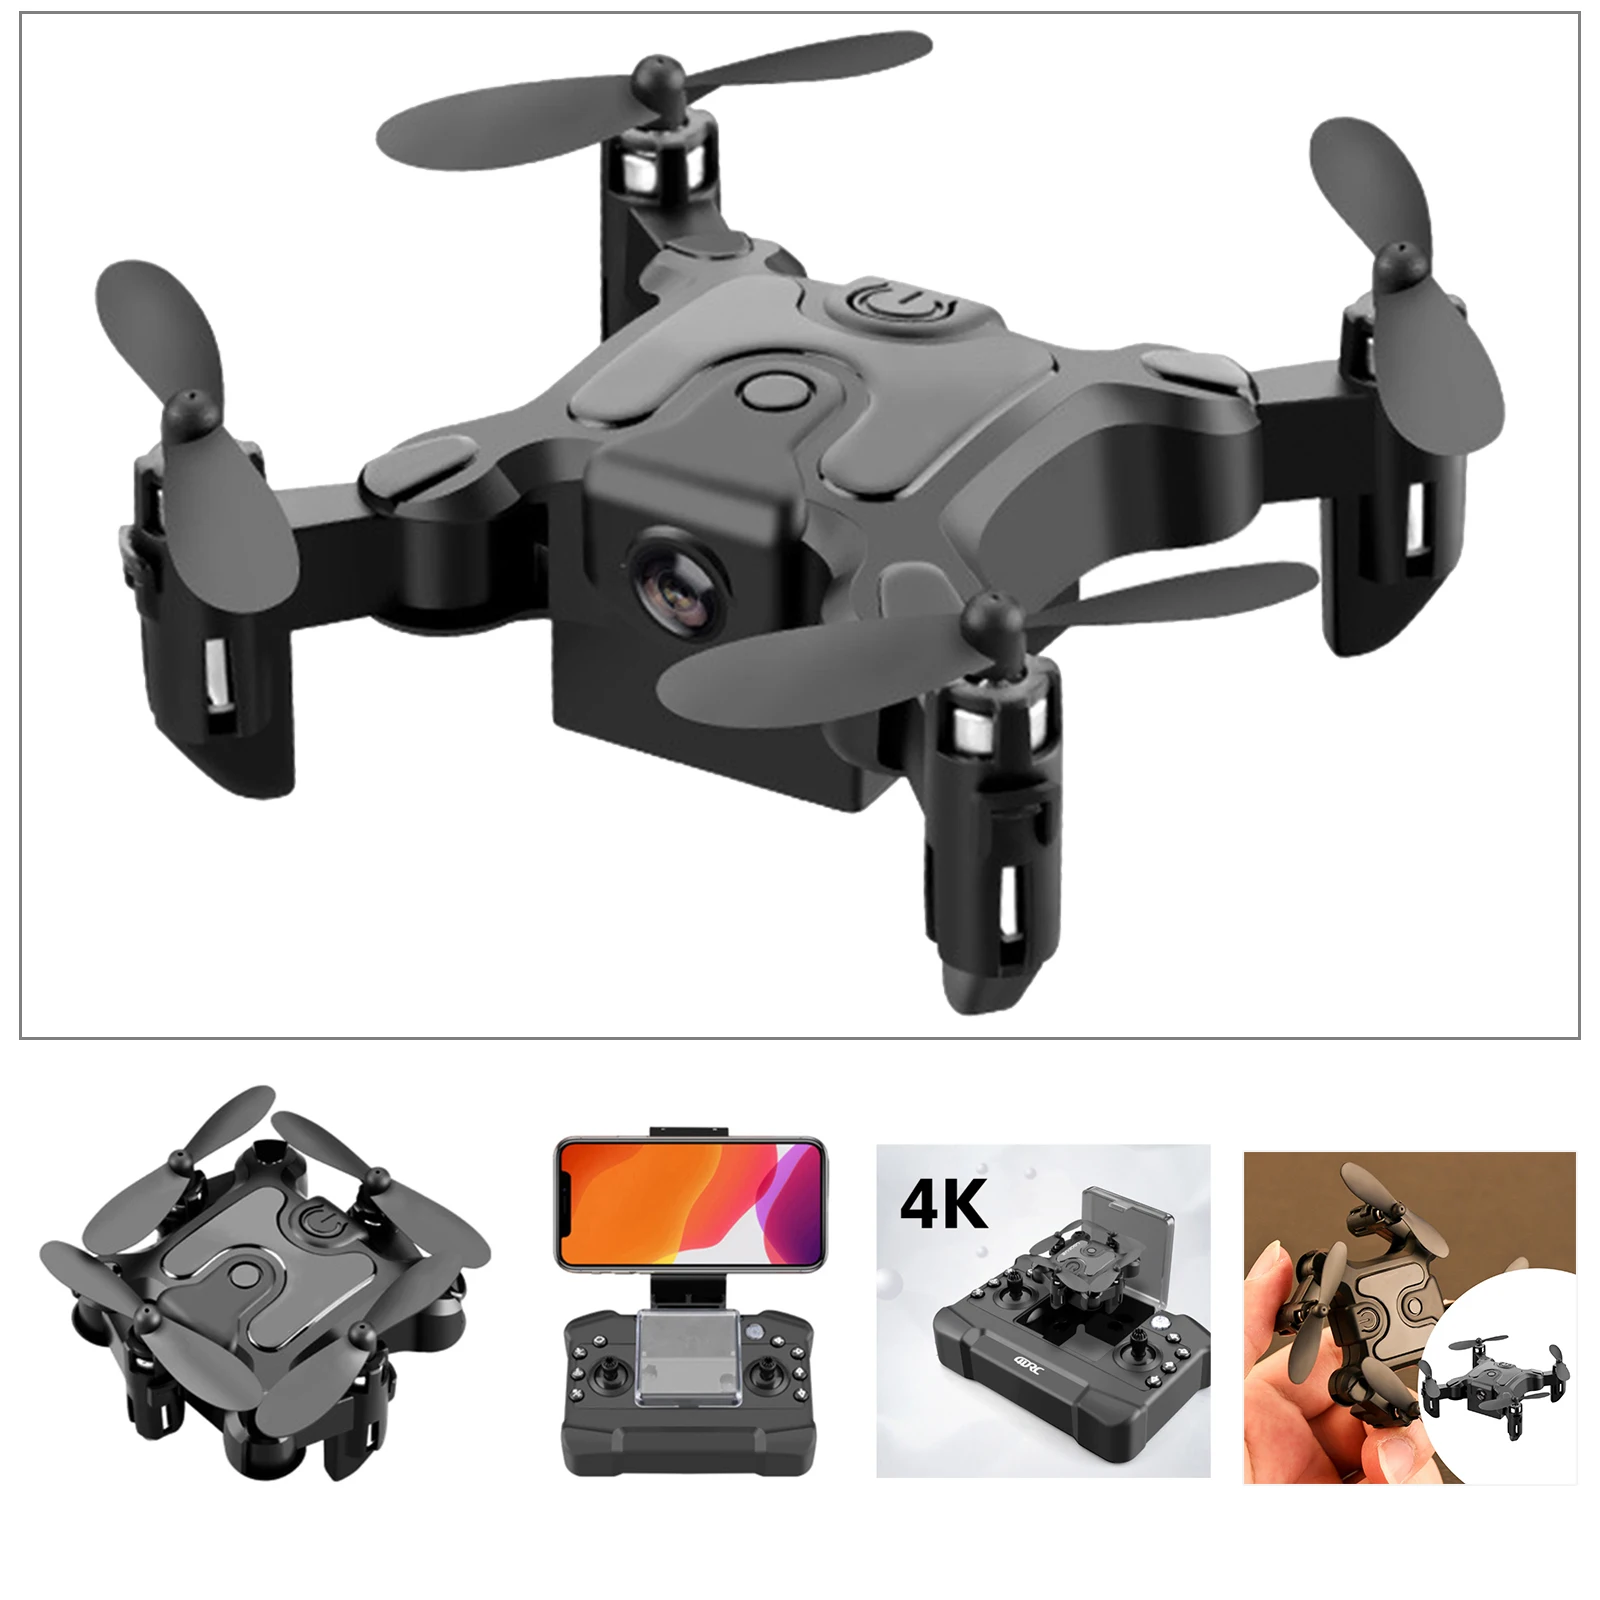 6-Axis 4CH RC Drone 2.4G Live Video Altitude Hold Radio Control Quadcopter